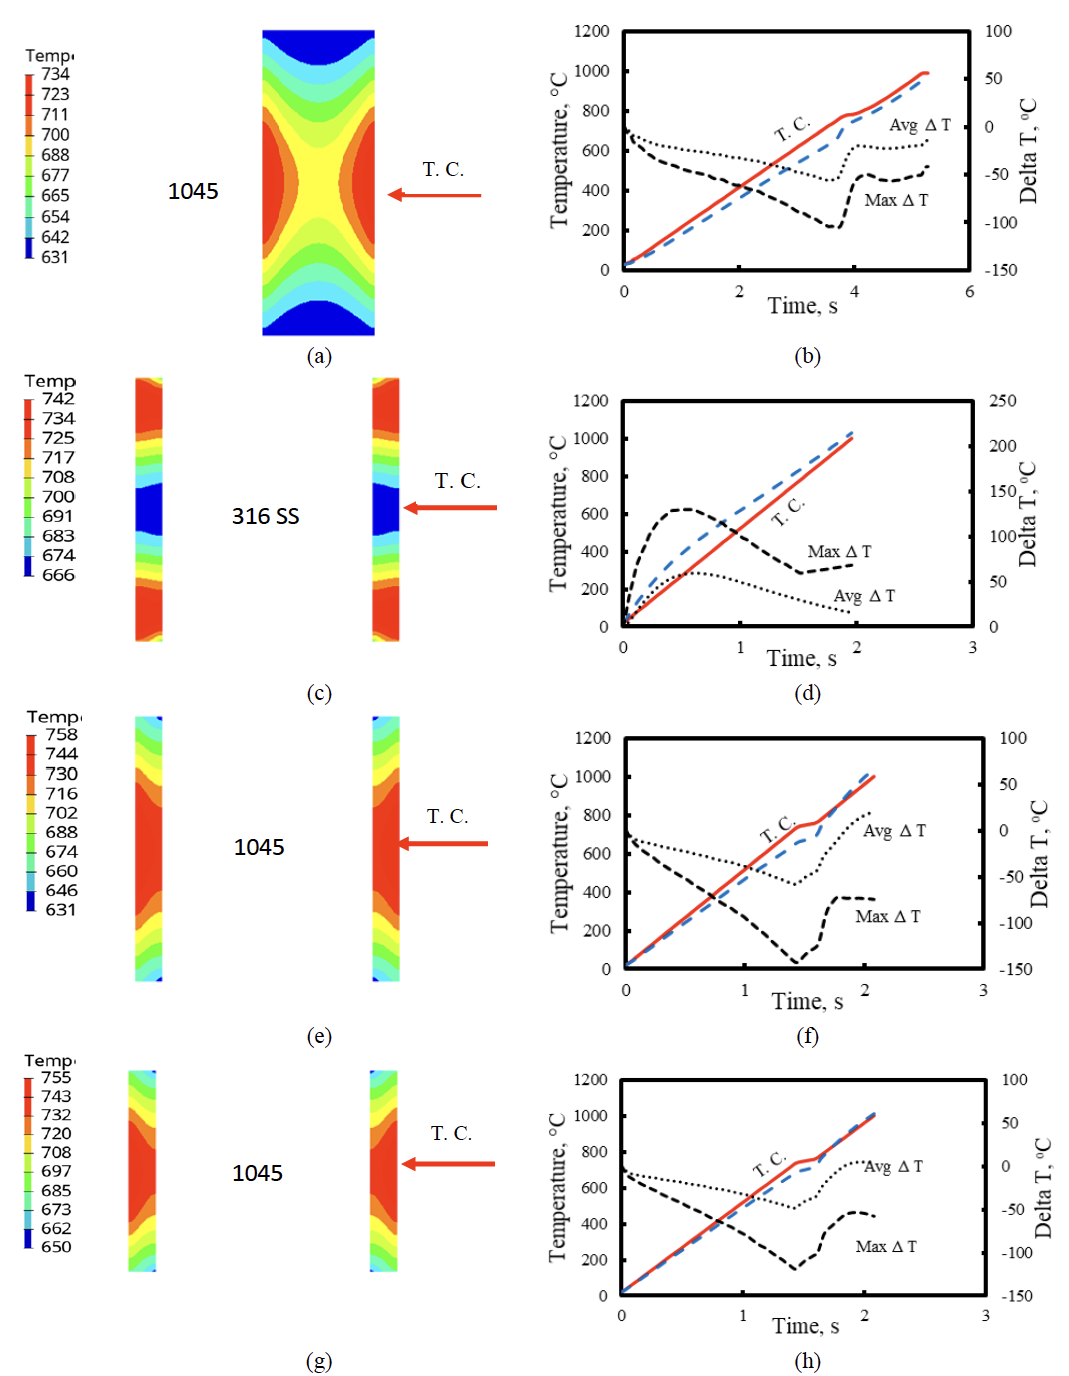 Fluxtrol | ASM HTS 2021 Influence of Specimen Design on Maximum Heating Rate and Temperature Variation During Induction Heating in an 805L Dilatometer Figure 8 - Model of temperature variation in (a), (b) 4 mm diameter by 10 mm long cylindrical specimen of 1045 steel heated at a rate of 200 °C·s<sup>-1</sup>, (c), (d) 10 mm diameter by 10 mm long austenitic stainless tube specimen heated at maximum power, (e), (f) 10 mm diameter by 10 mm long tube specimen of 1045 steel heated at maximum power, and (g) ,(h) 10 mm diameter by 7.5 mm long tube specimen of 1045 steel heated at maximum power.